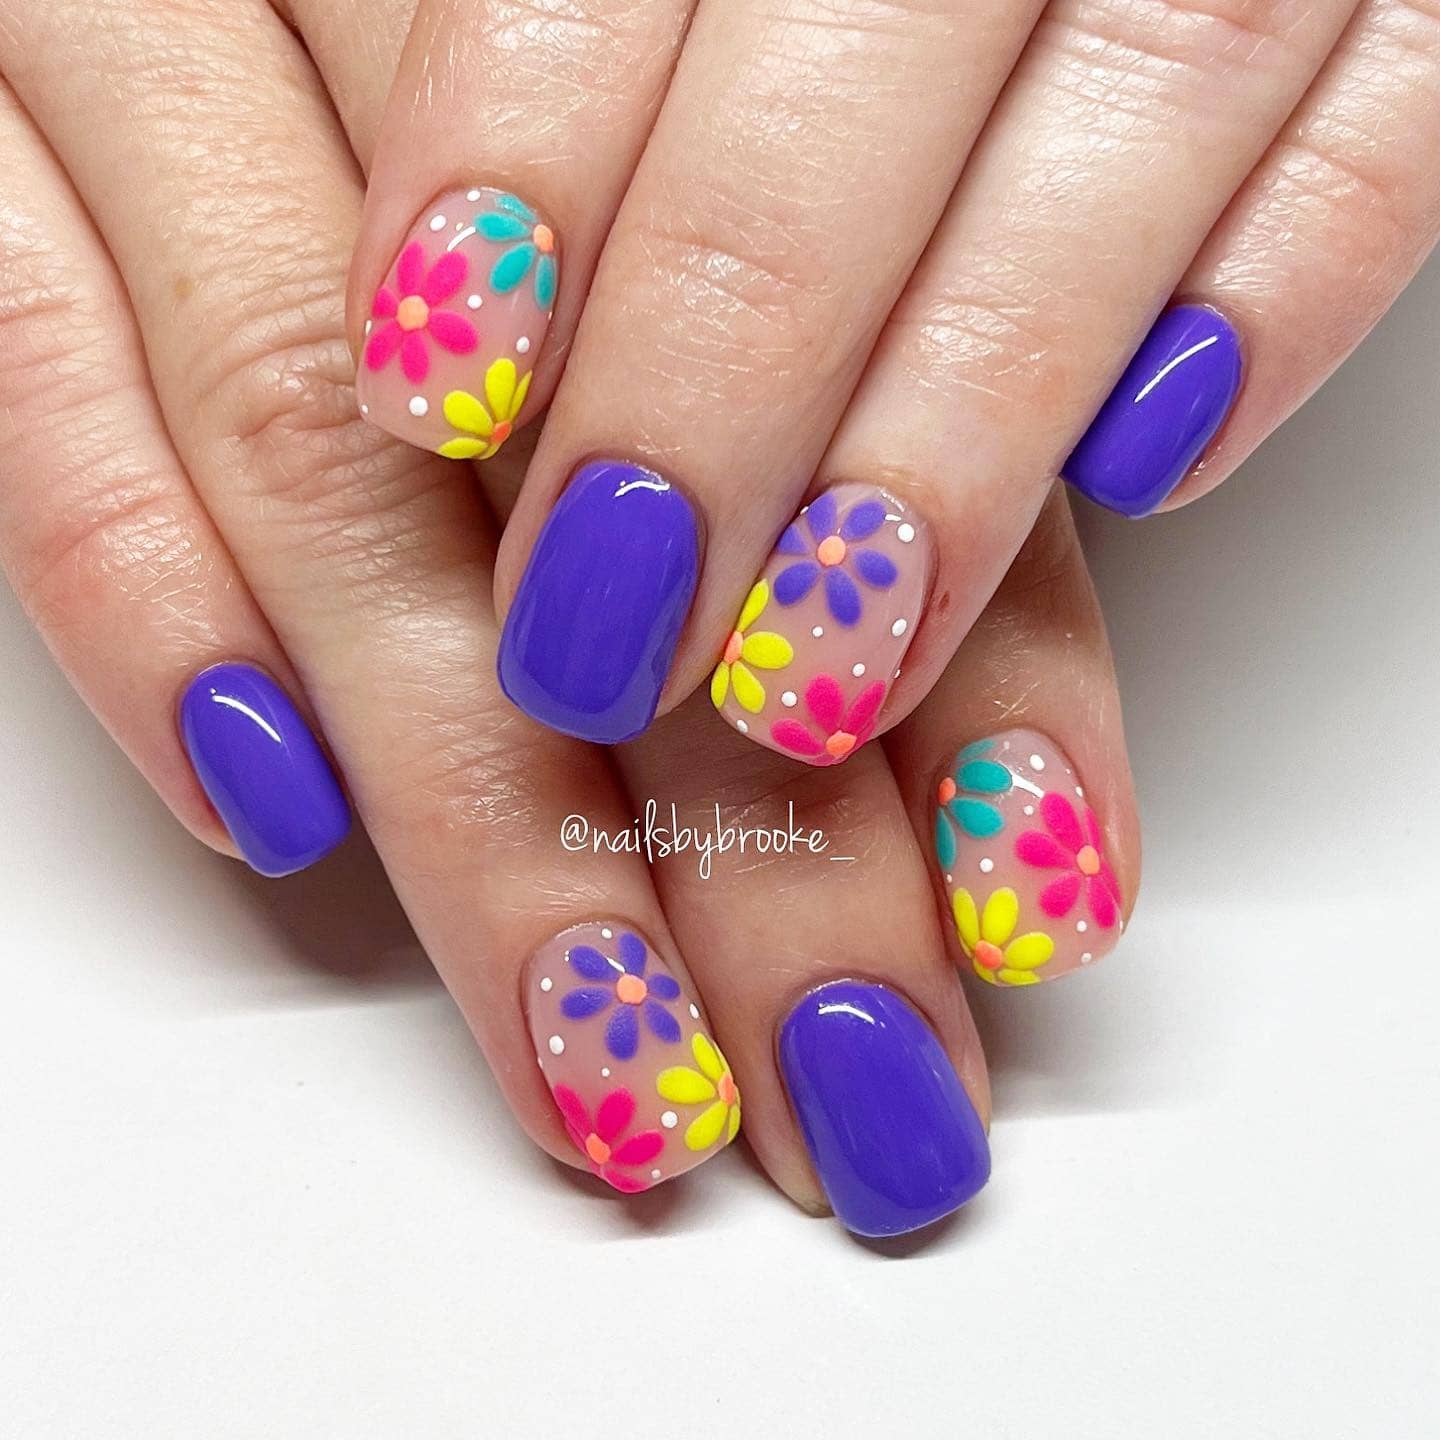 Over 100 Bright Summer Nail Art Designs That Will Be So Trendy images 4